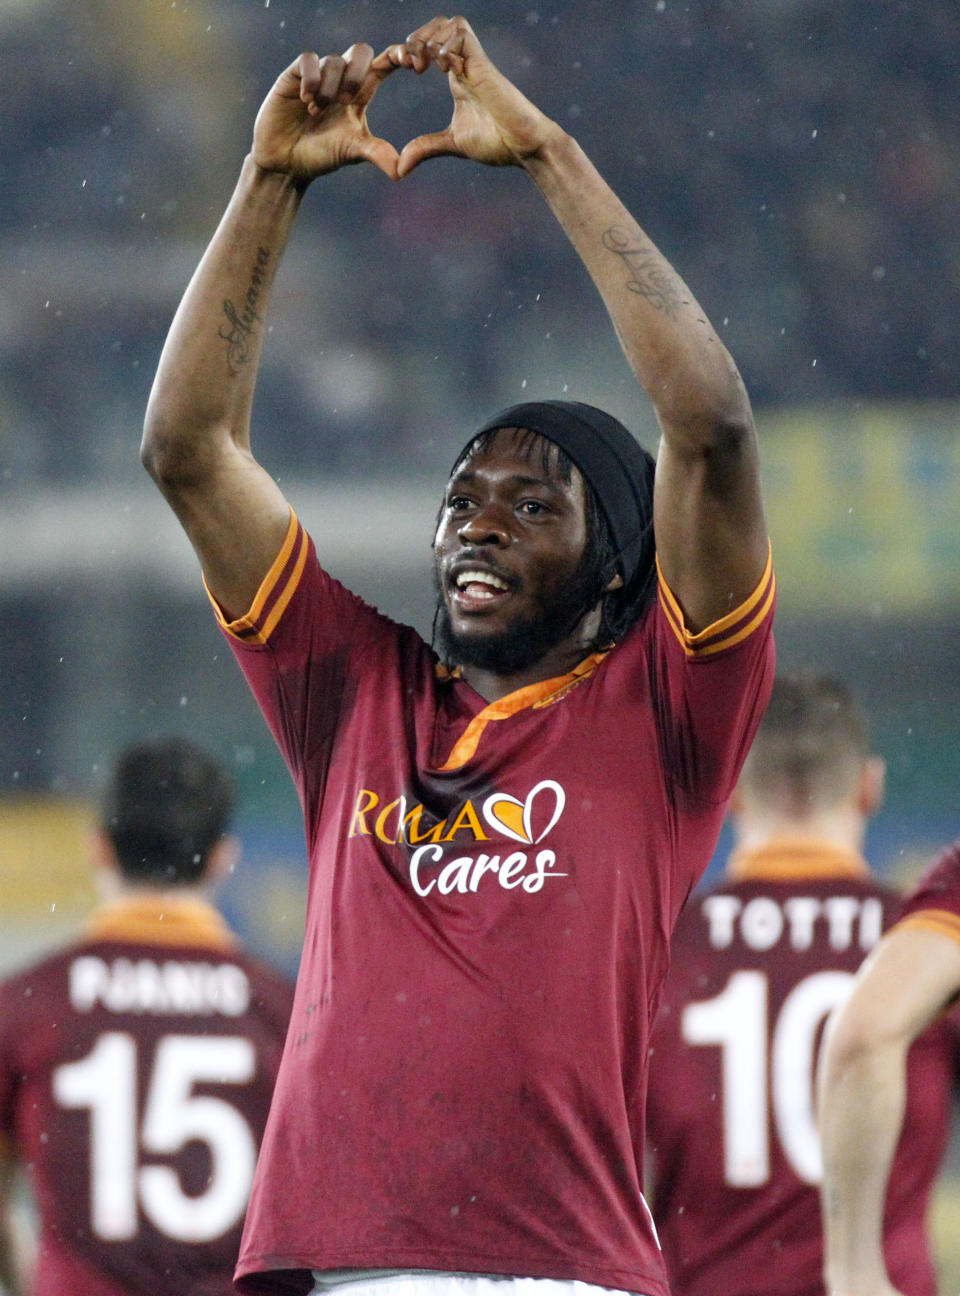 AS Roma forward Gervinho, of Ivory Coast, celebrates after scoring during a Serie A soccer match against Chievo at Bentegodi stadium in Verona, Italy, Saturday, March 22, 2014. (AP Photo/Felice Calabro')